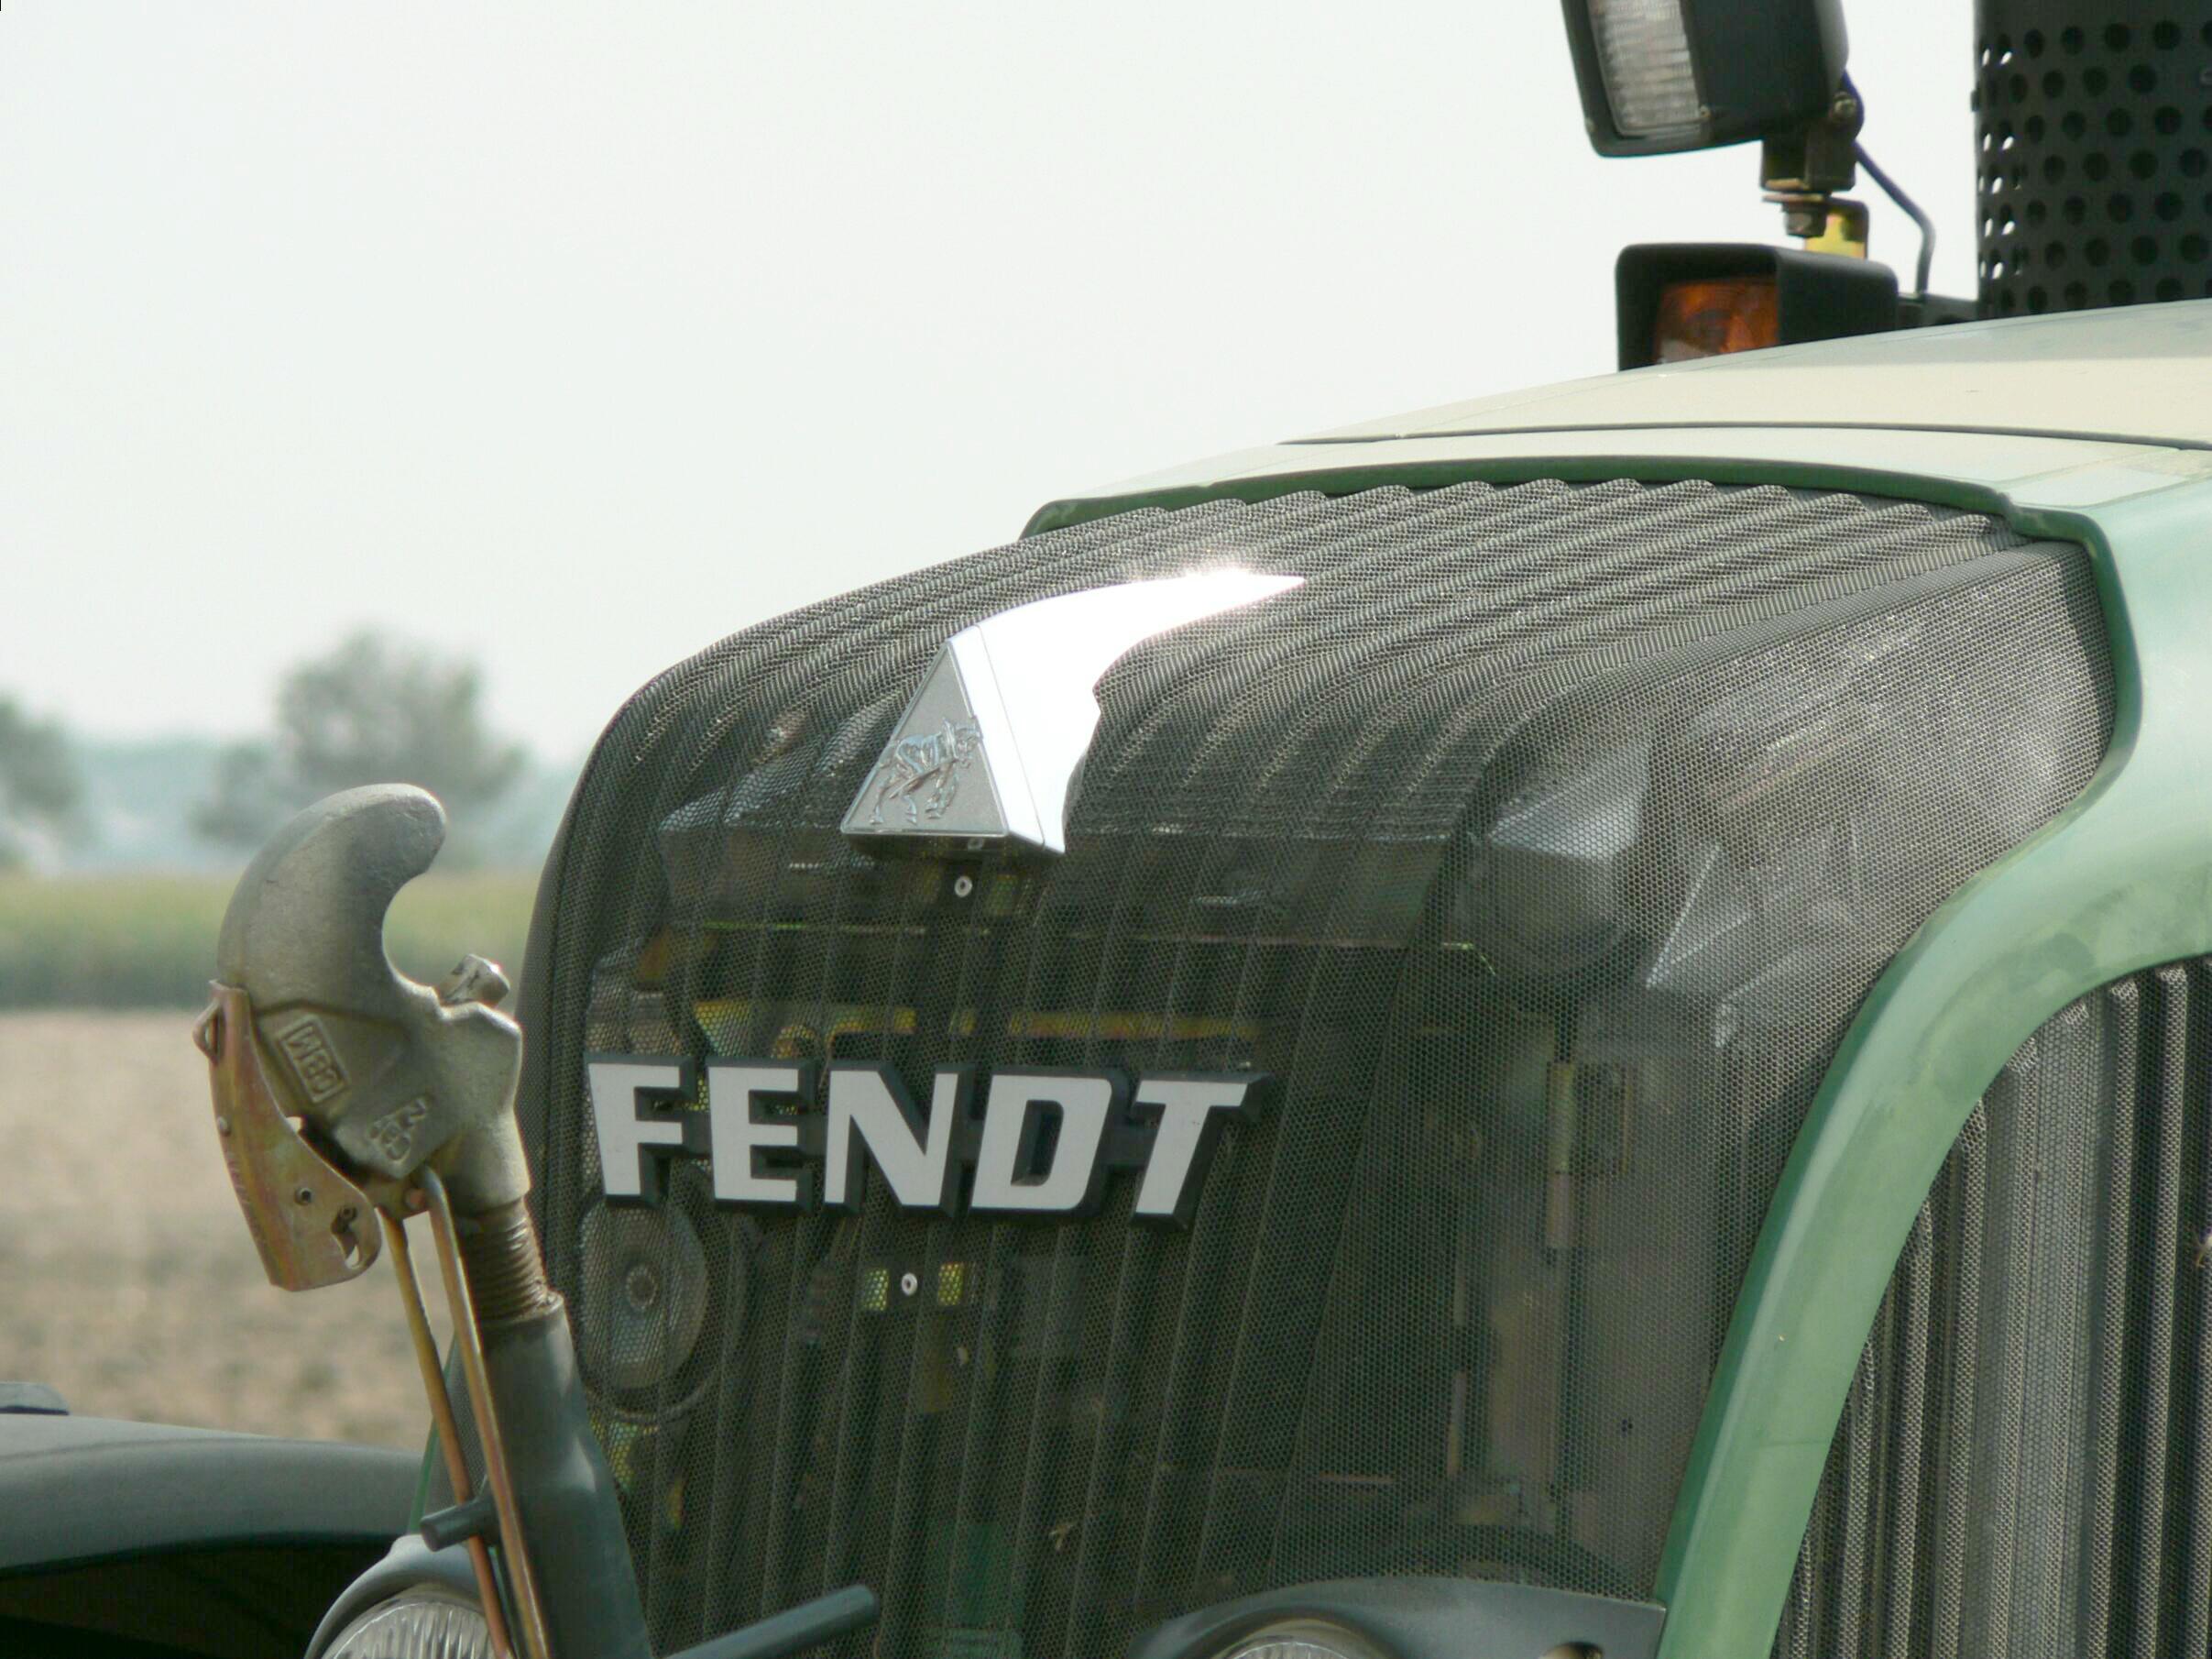 New engine and driveline for Fendt 728 - Profi